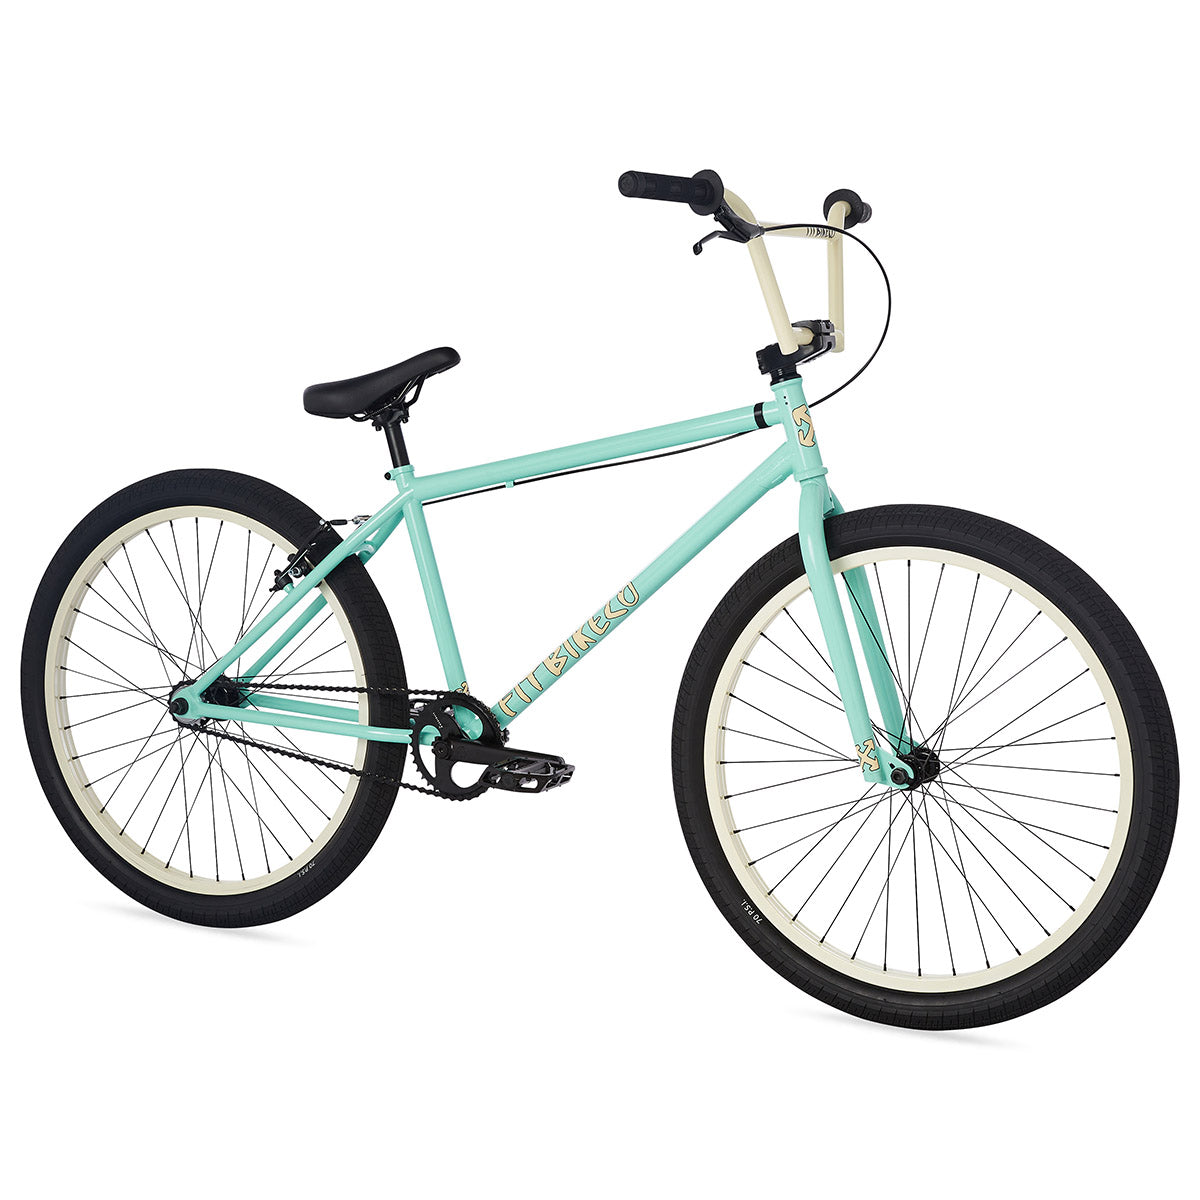 *FREE SHIPPING* 2023 Fit CR 26" Bike ||| Plus other 20 inch bmx bikes || Sold from Secret bmx in CA $314.99